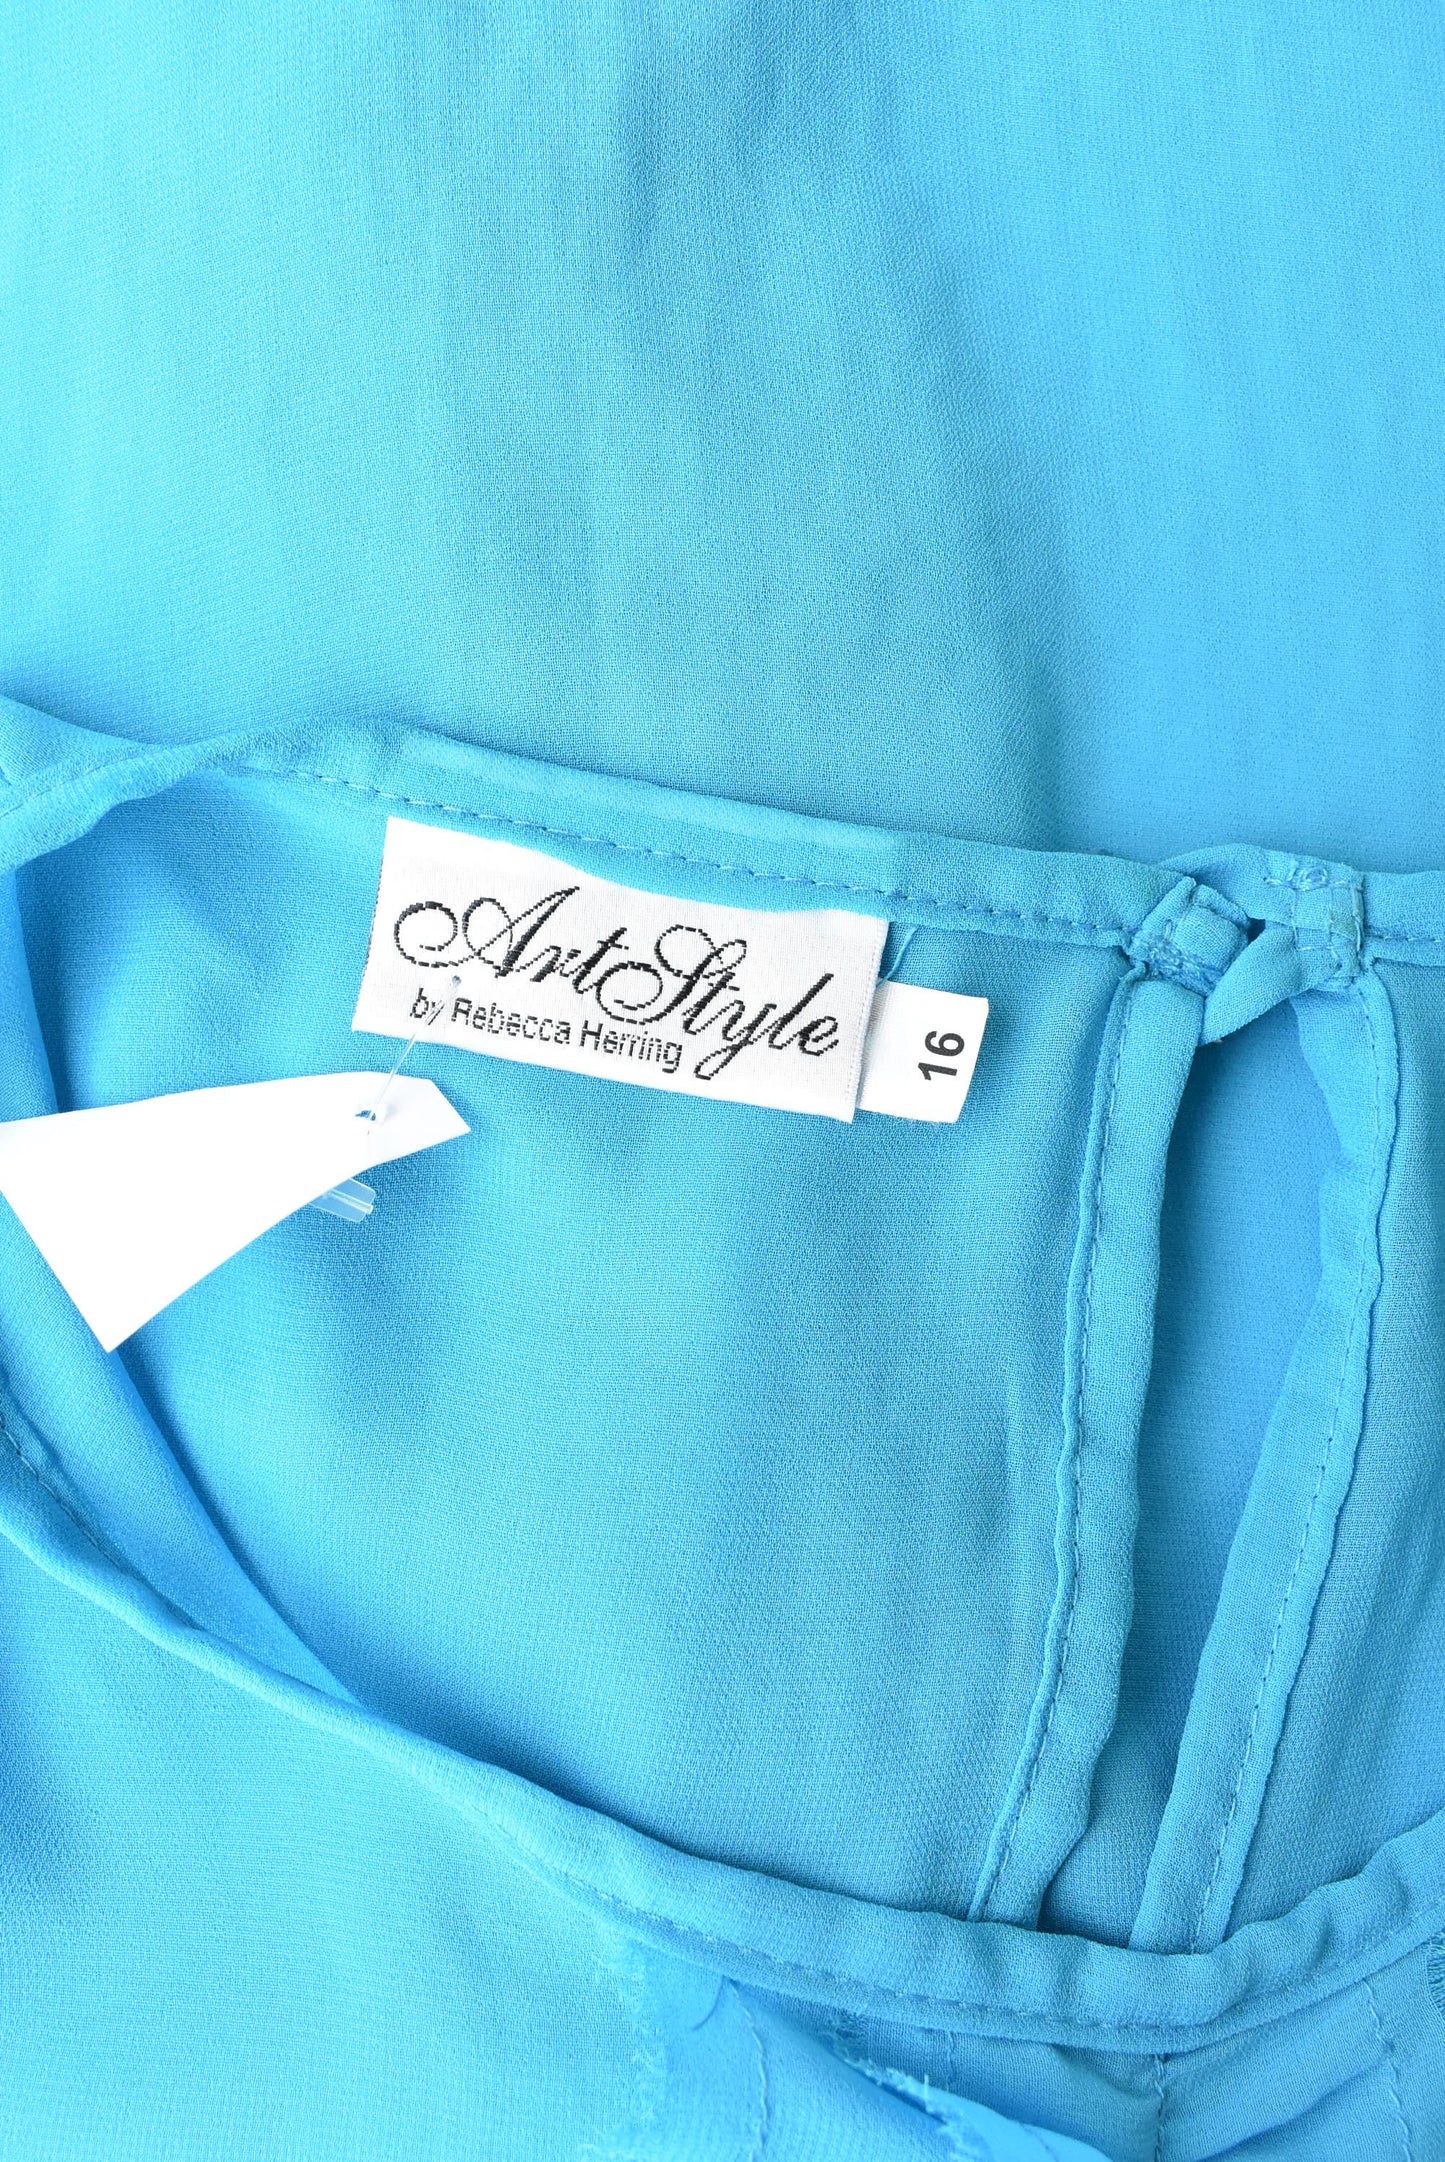 Art Style sheer blue top, size 16